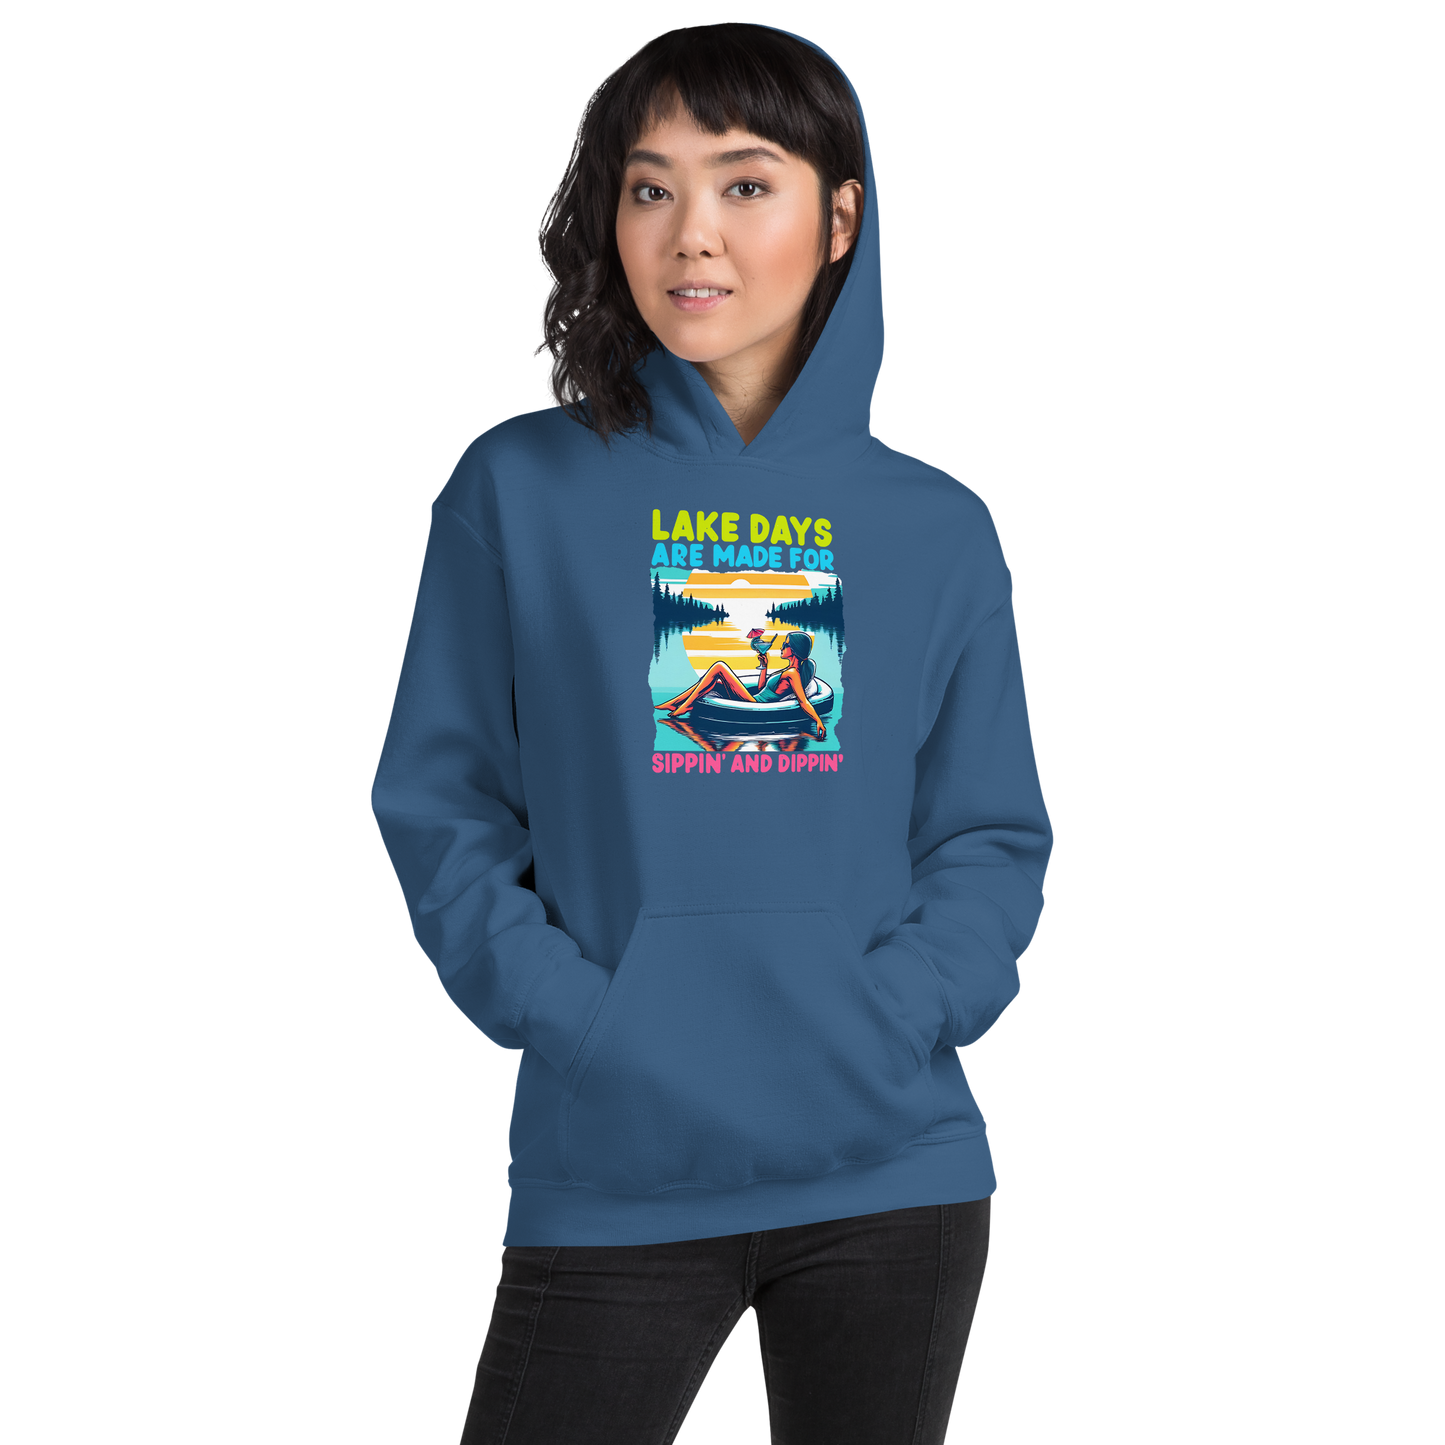 Hoodie with "Lake Days Are Made for Sipping and Dipping," showing a woman on a tube float with a cocktail, lake and sunset scene.